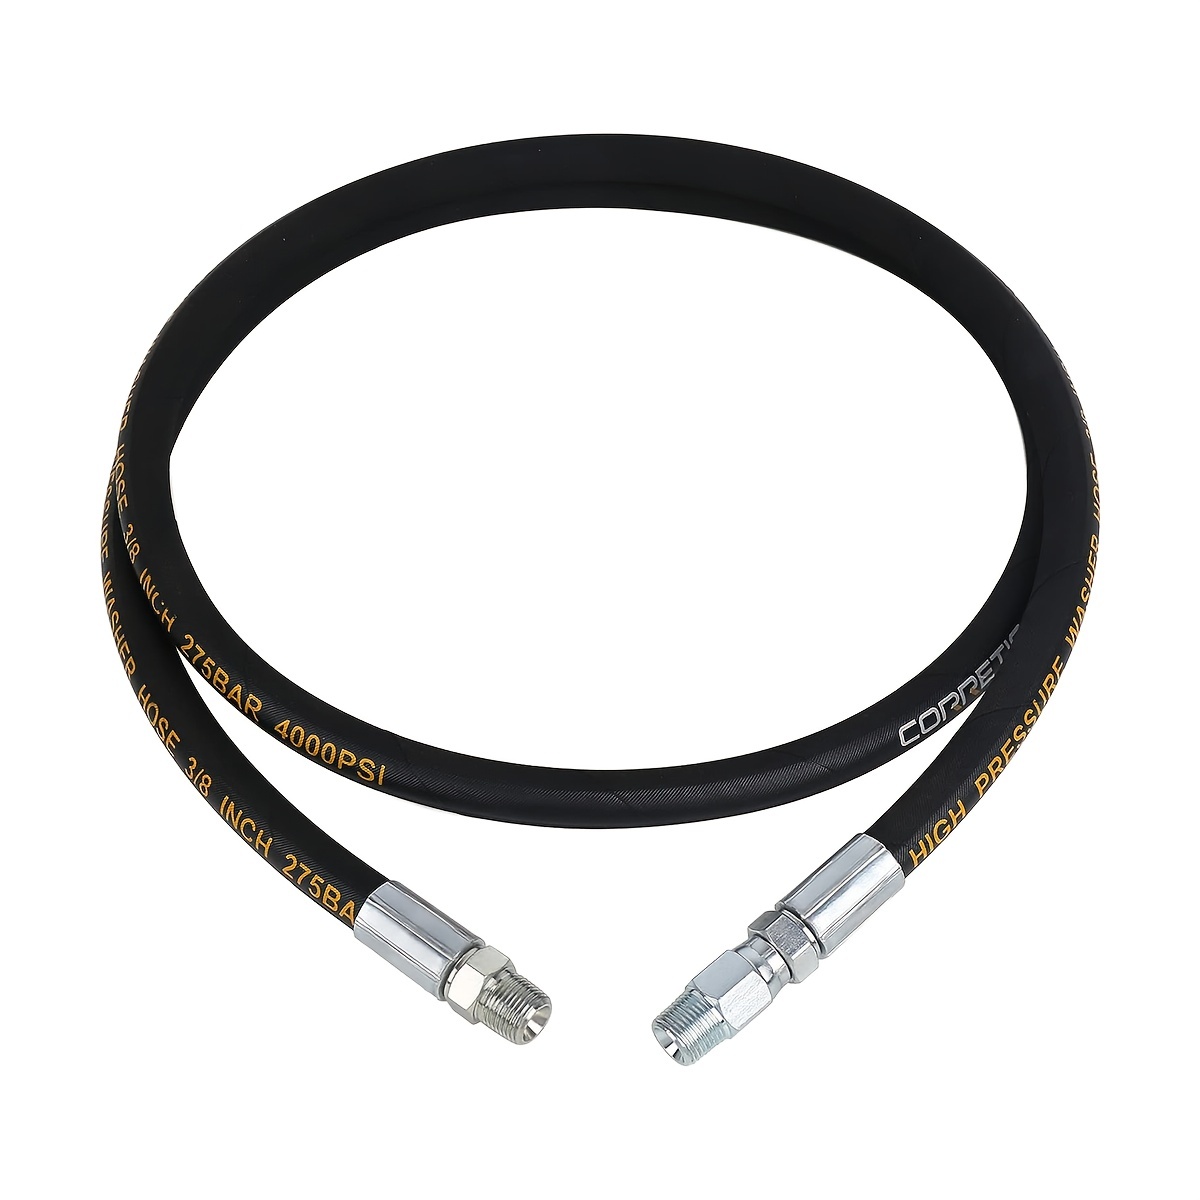 1pc Pressure Washer Whip Hose, Hose Reel Connector Hose For Pressure  Washing, 4000 PSI Power Washer Jumper Hose, 6 FT*3/8 Inches